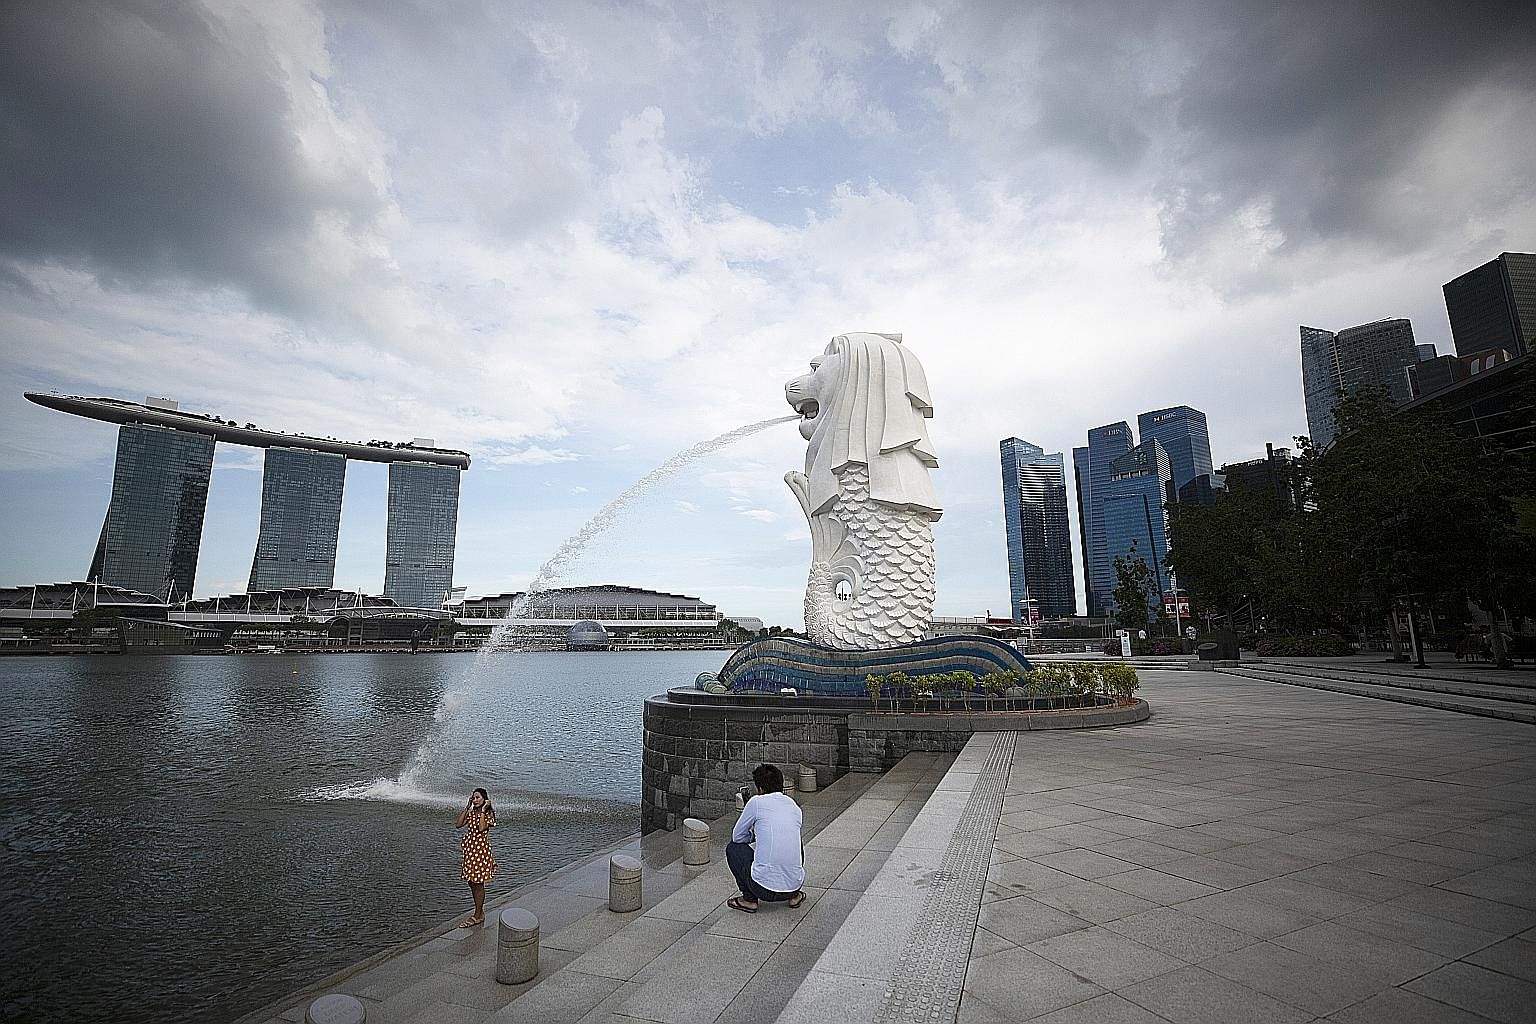 The Singapore Government announced last Thursday a further $48.4 billion supplementary budget to support businesses, workers and families during the coronavirus pandemic. This will draw on national reserves for the first time since the global financi